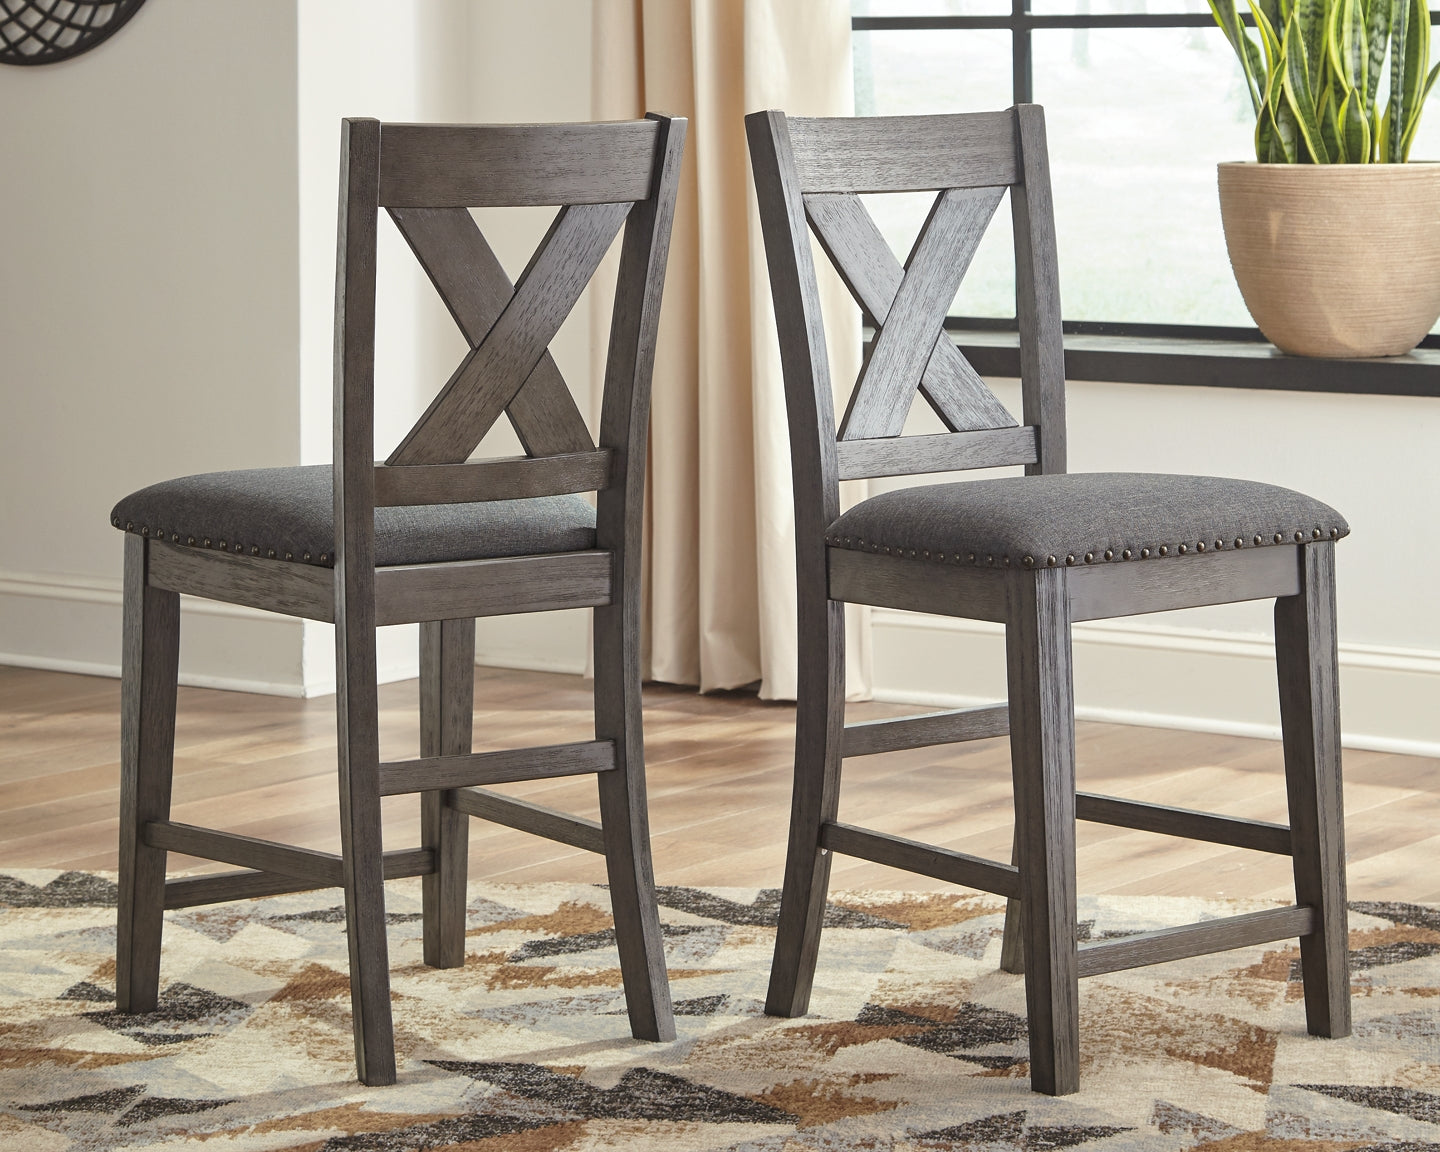 Caitbrook Counter Height Dining Table and 4 Barstools Smyrna Furniture Outlet